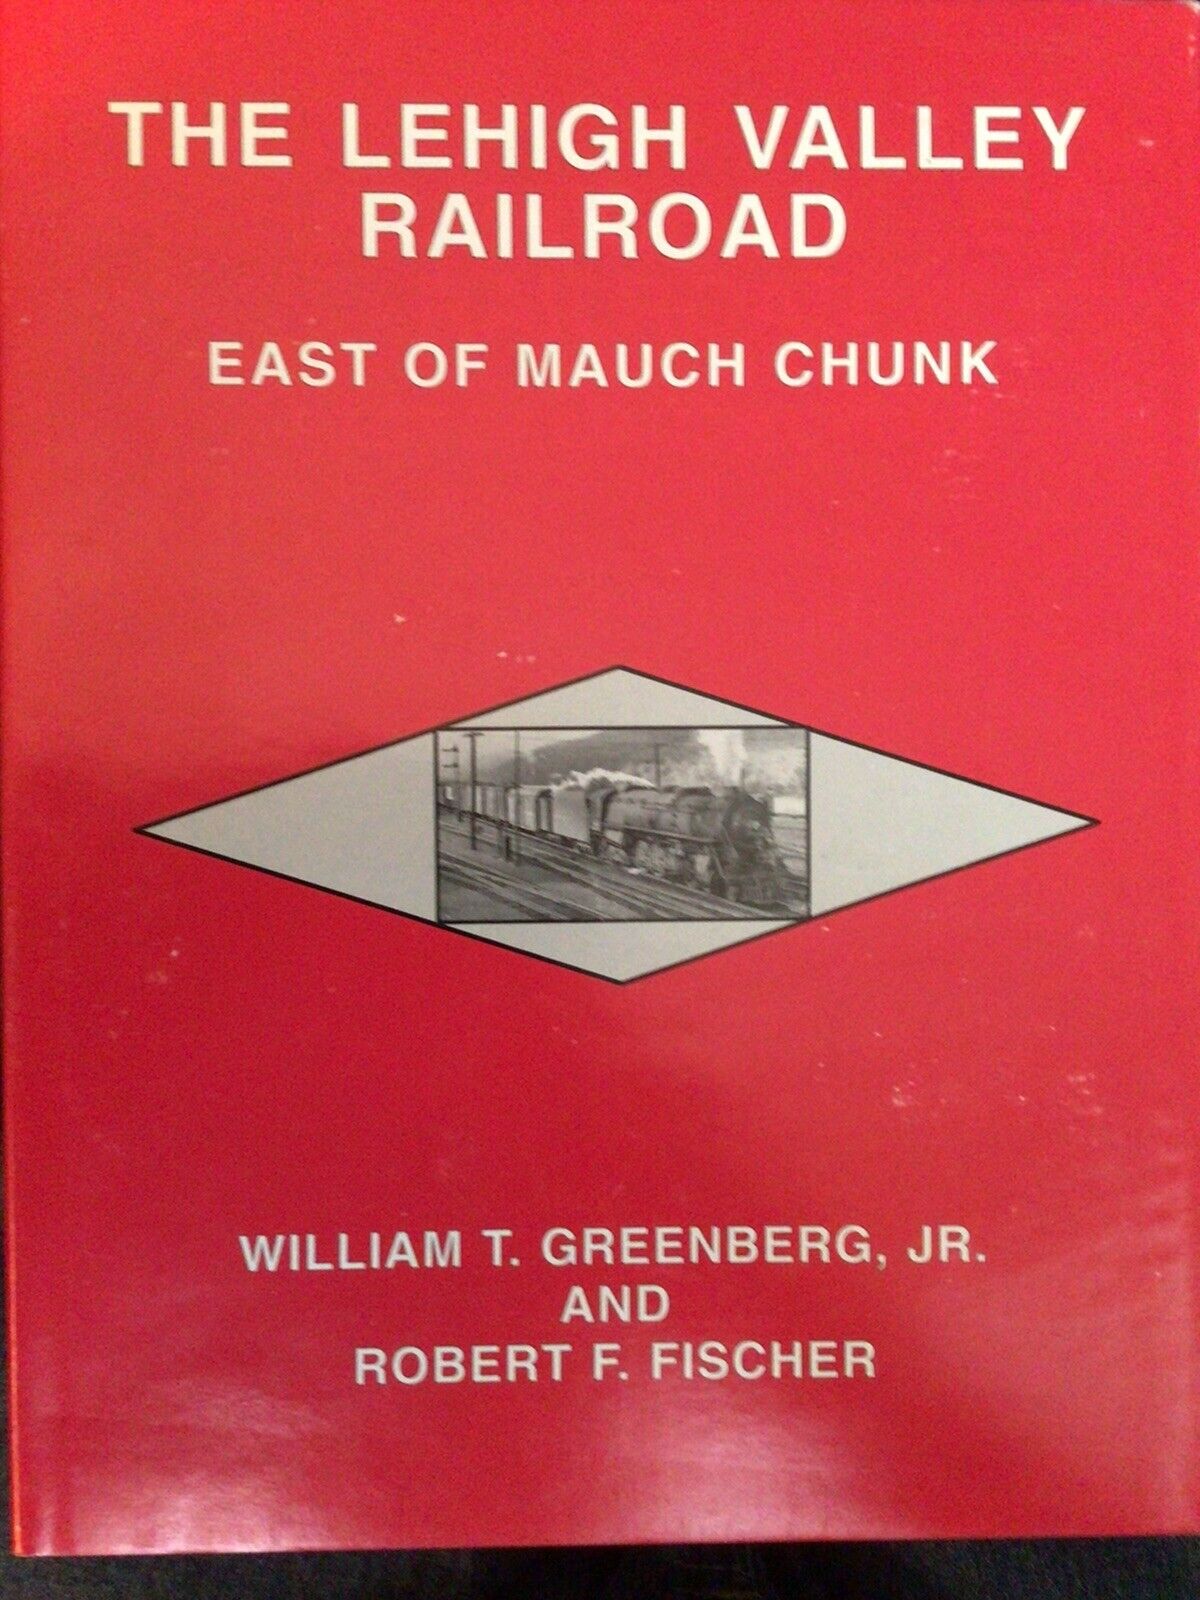 Lehigh Valley Railroad, The   East of Mauch Chunk by Greenberg Jr & Fischer